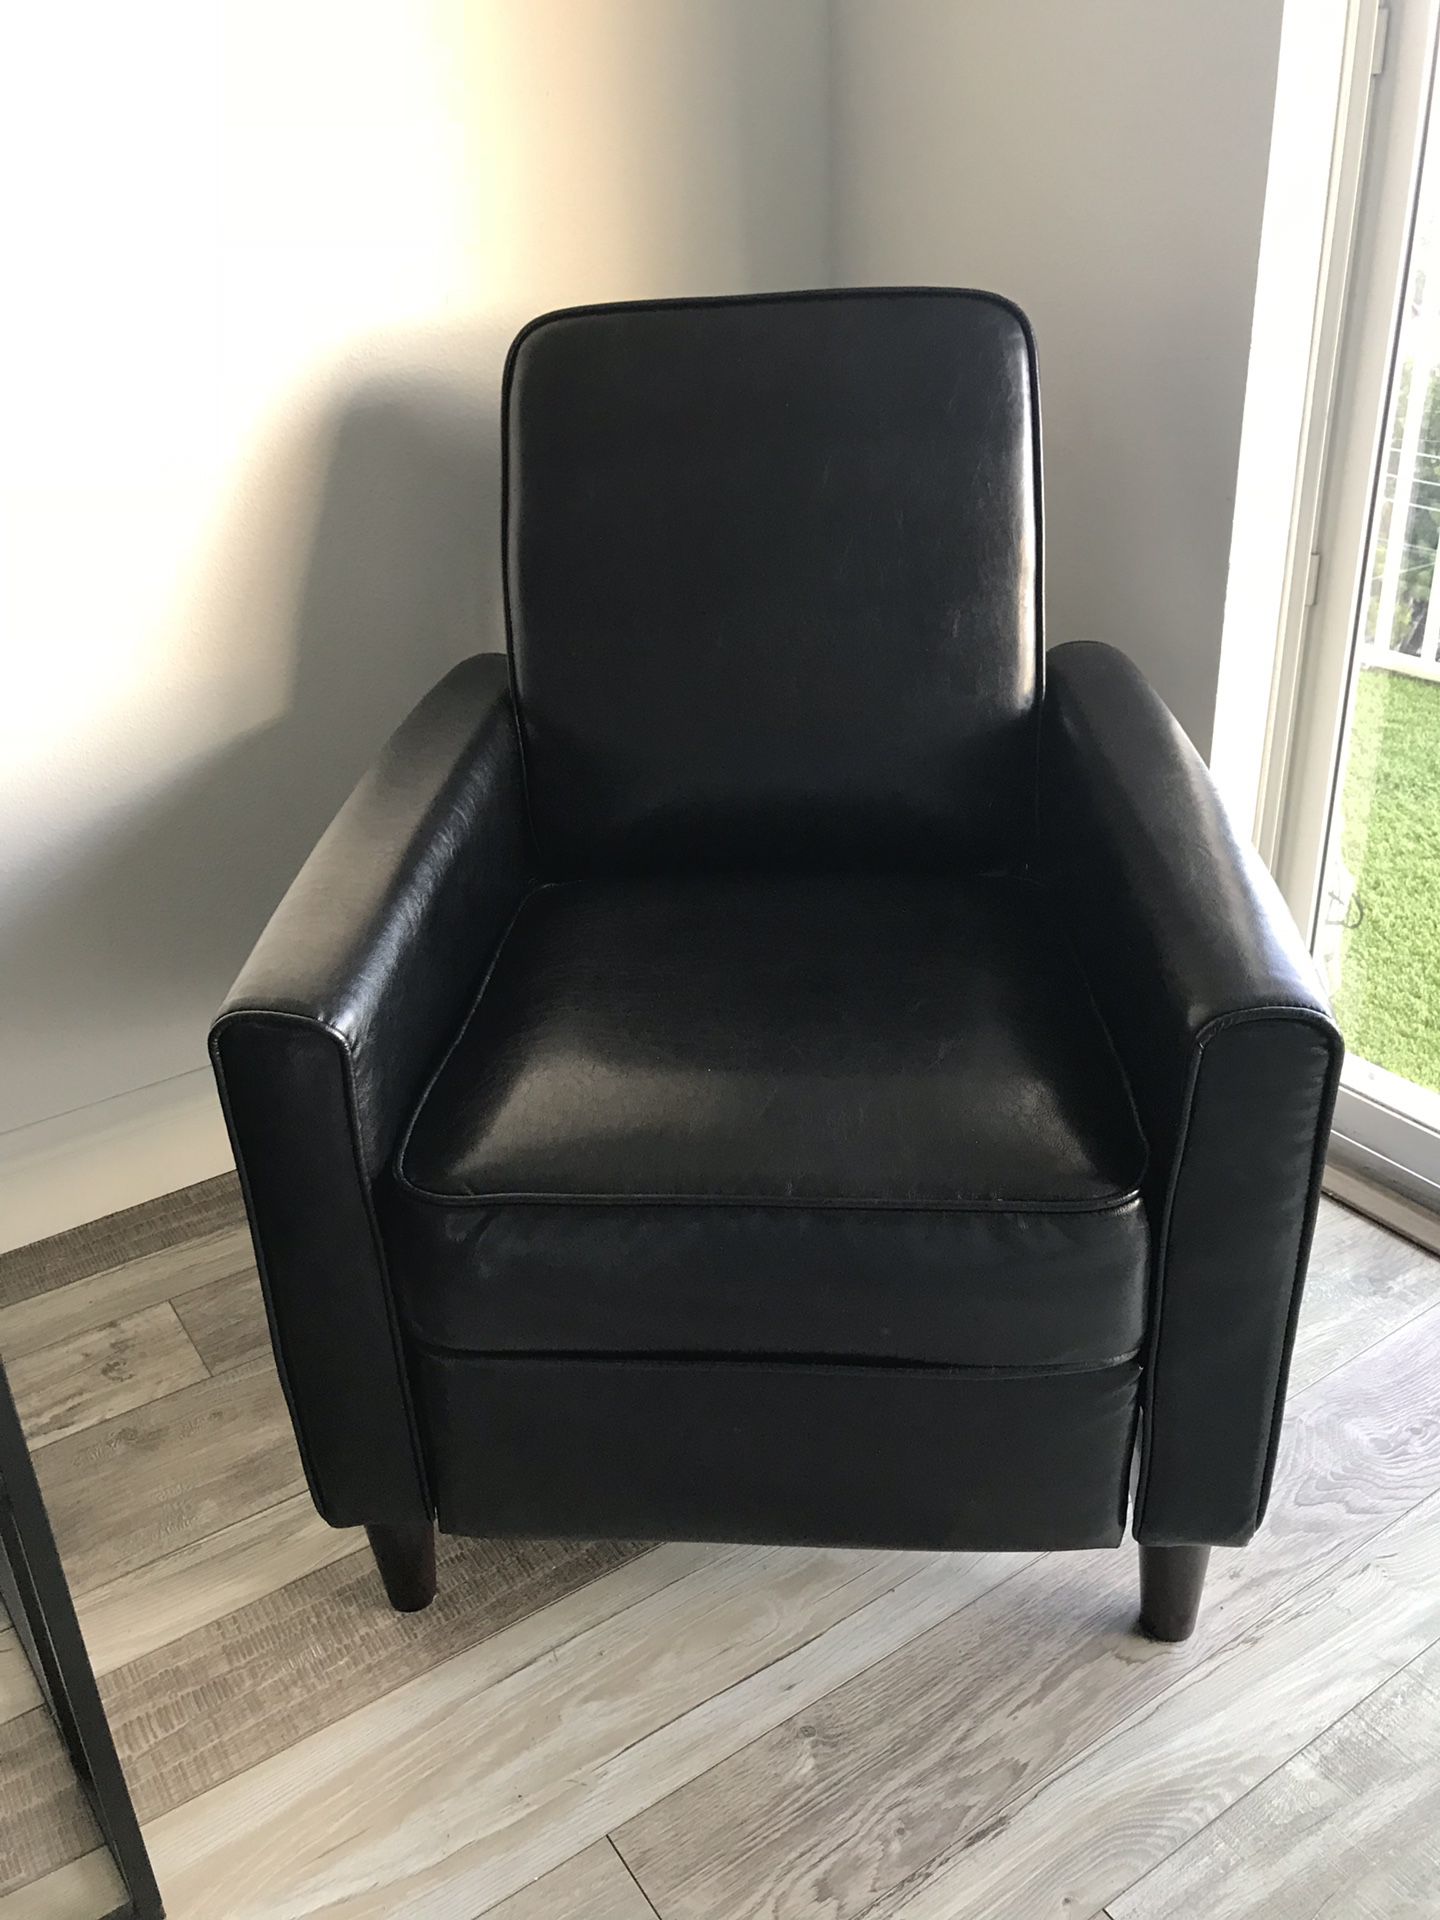 MUST GO Black Reclinable Chair